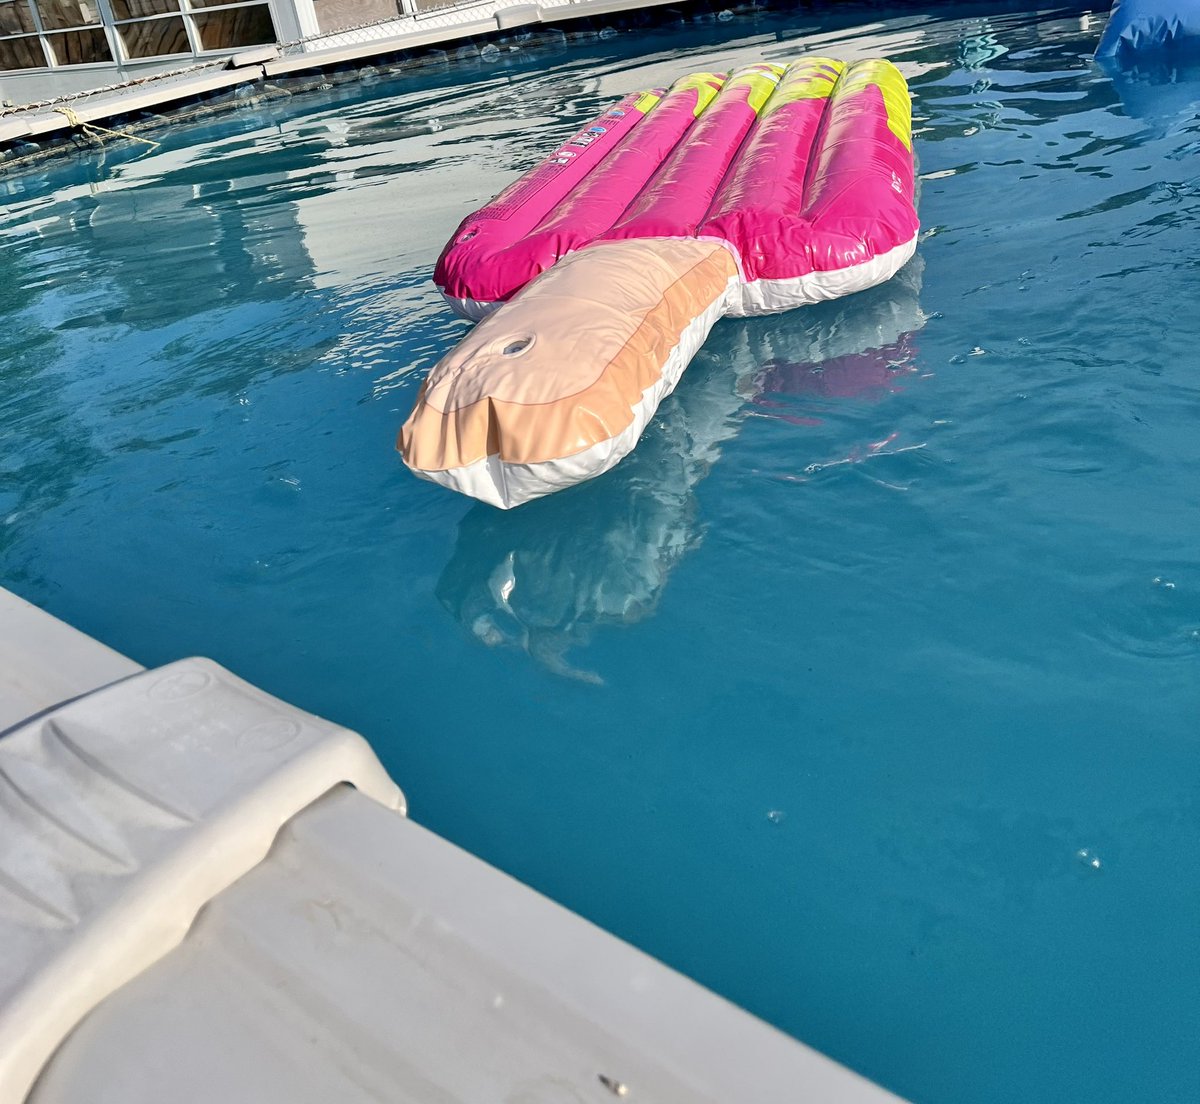 I don’t know. Maybe in hindsight the popsicle pool floaty might’ve been a bad idea.